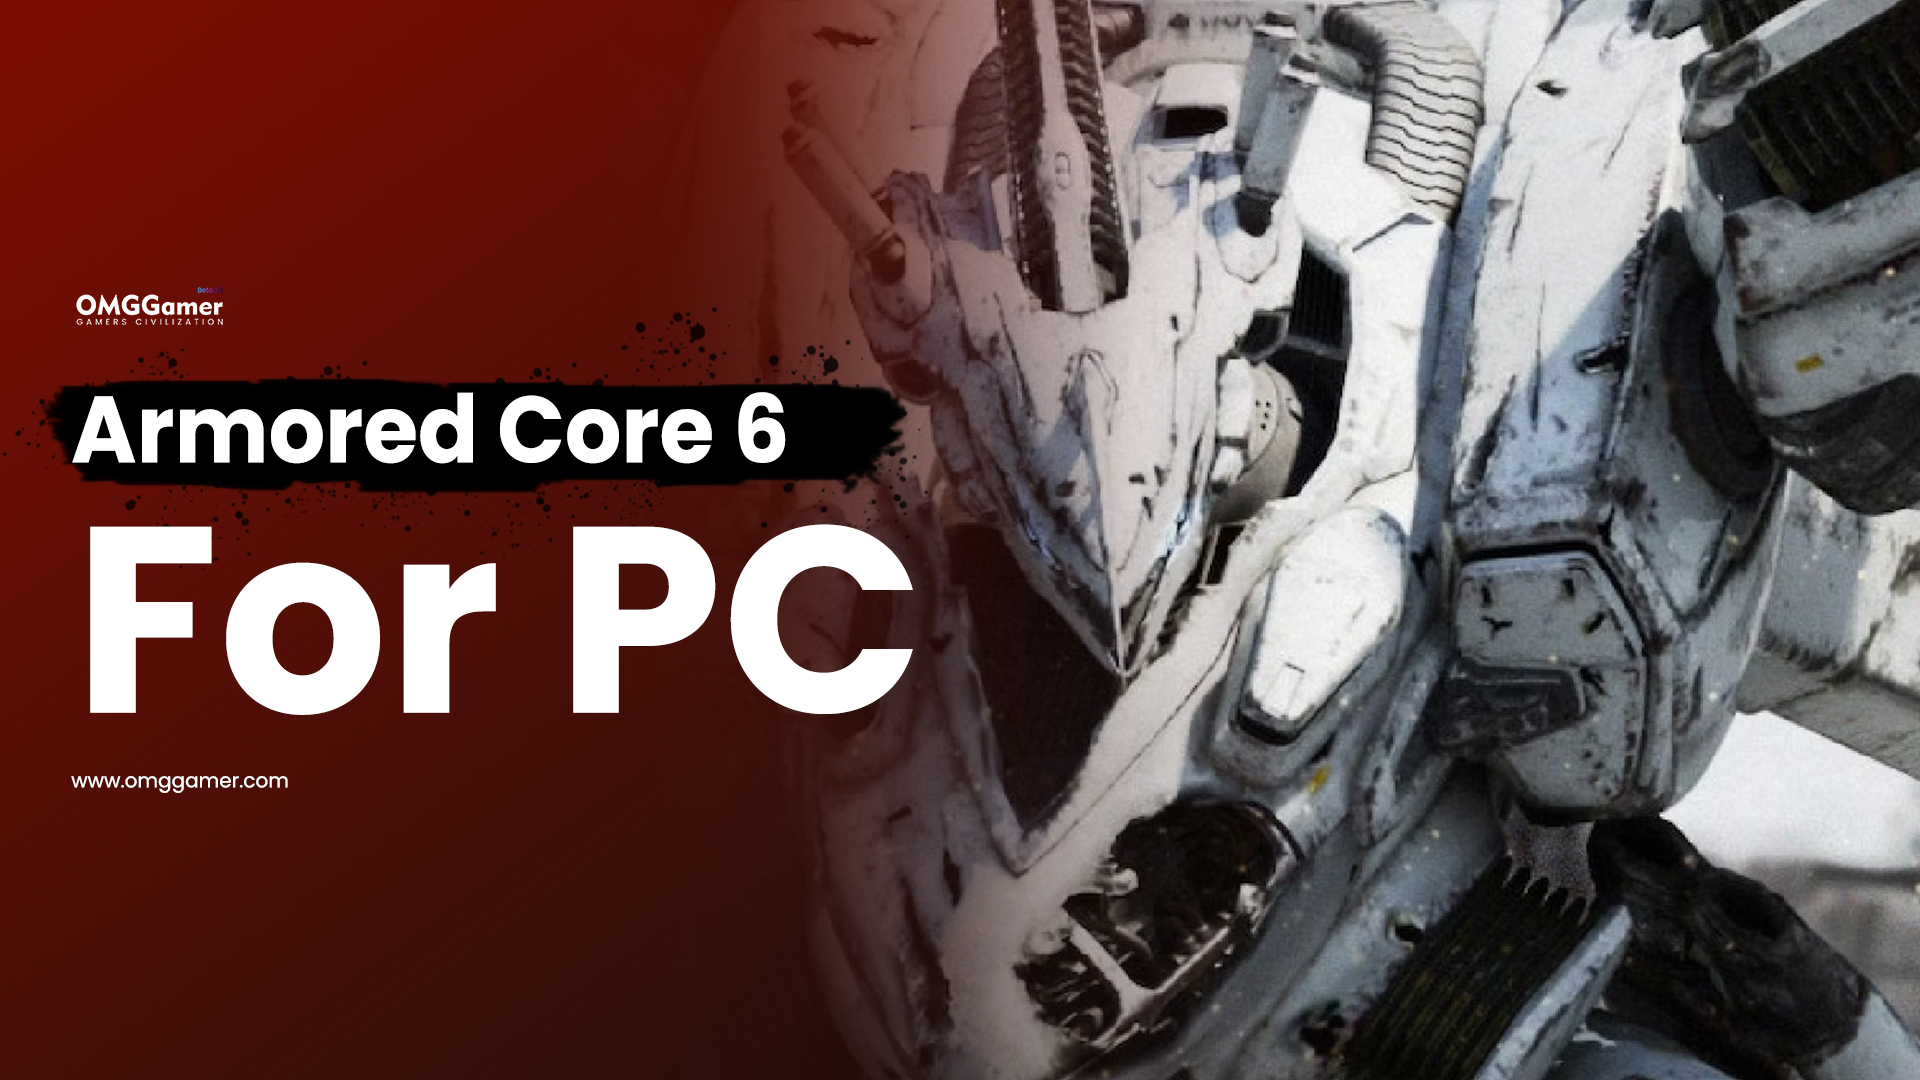 Armored Core 6 for PC